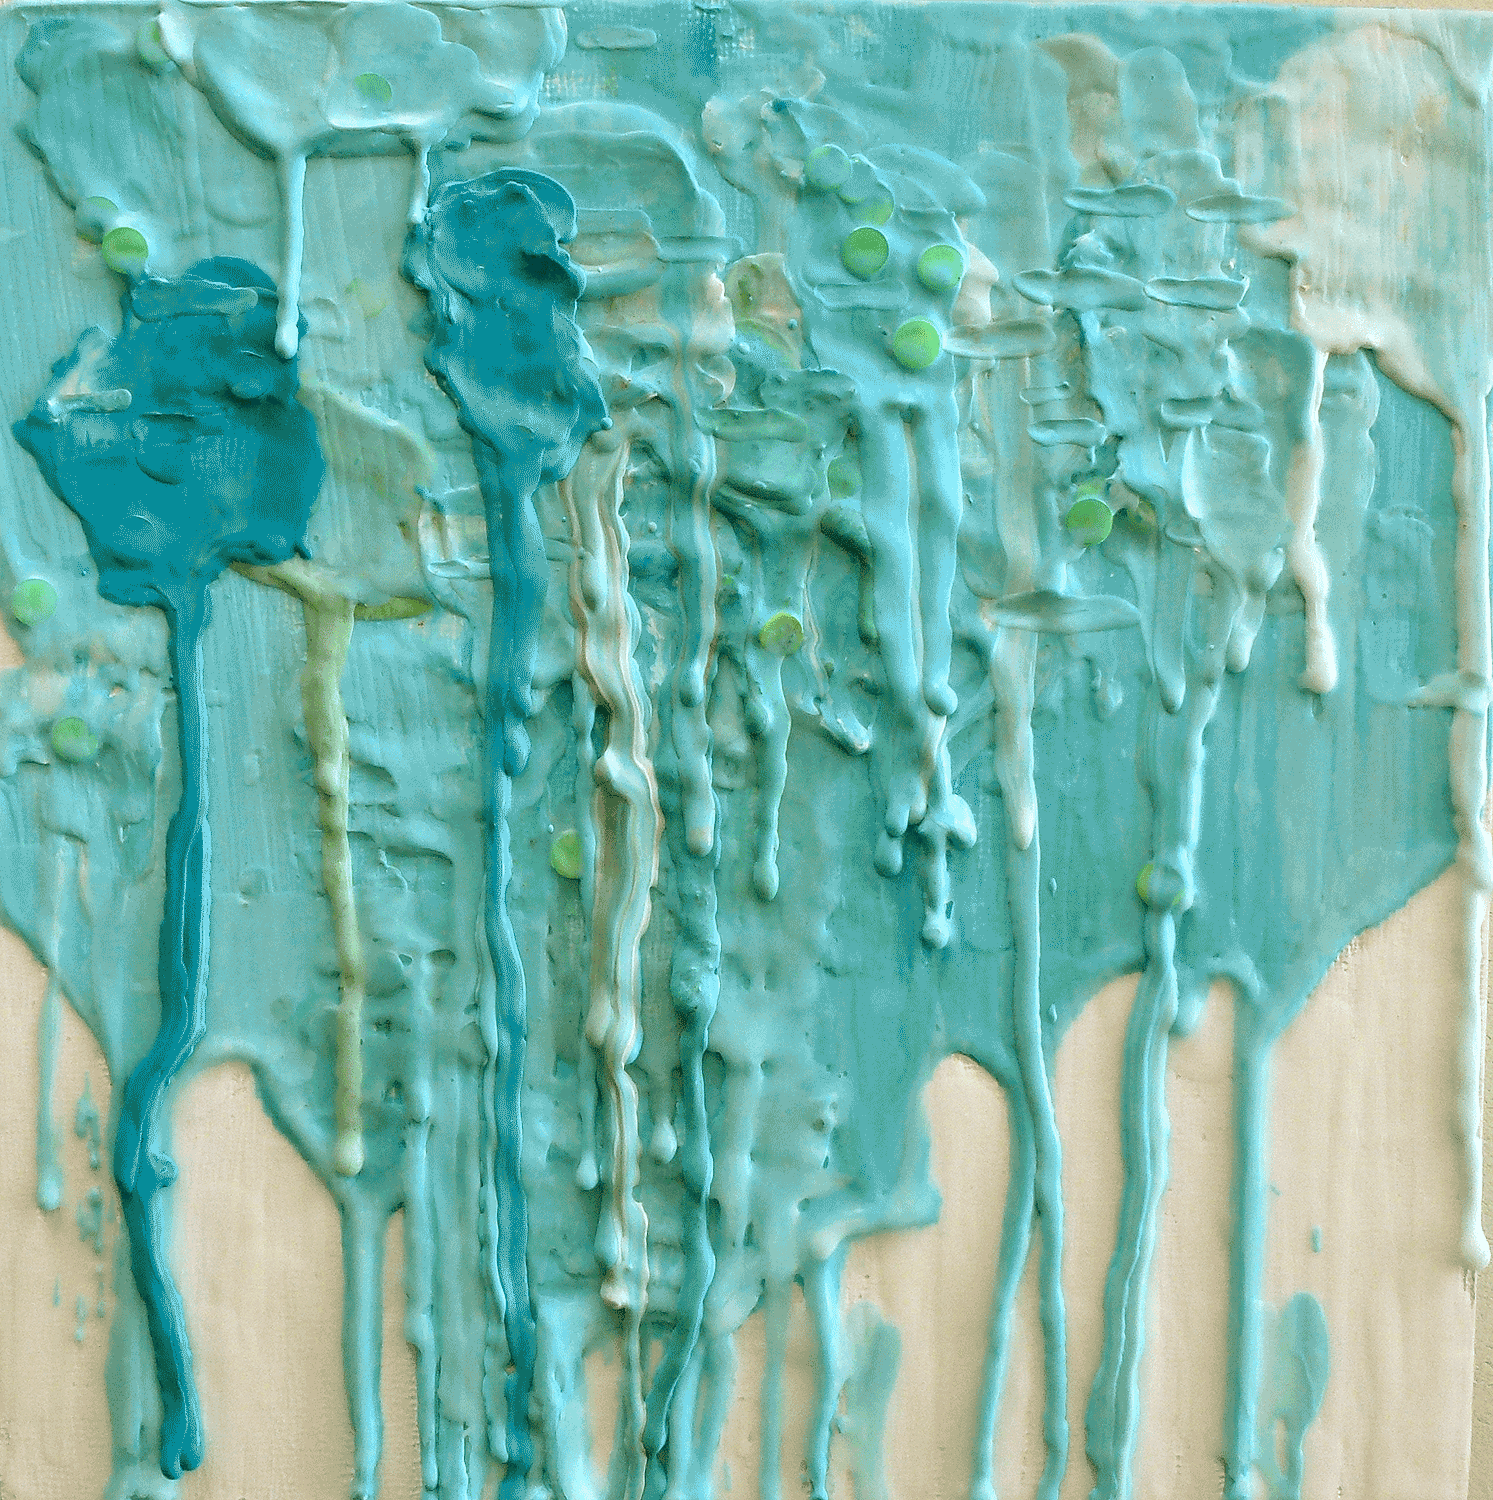   Point of Least Confusion   2012 | encaustic and sequins on panel | 8 x 8 &nbsp;|​ $275 